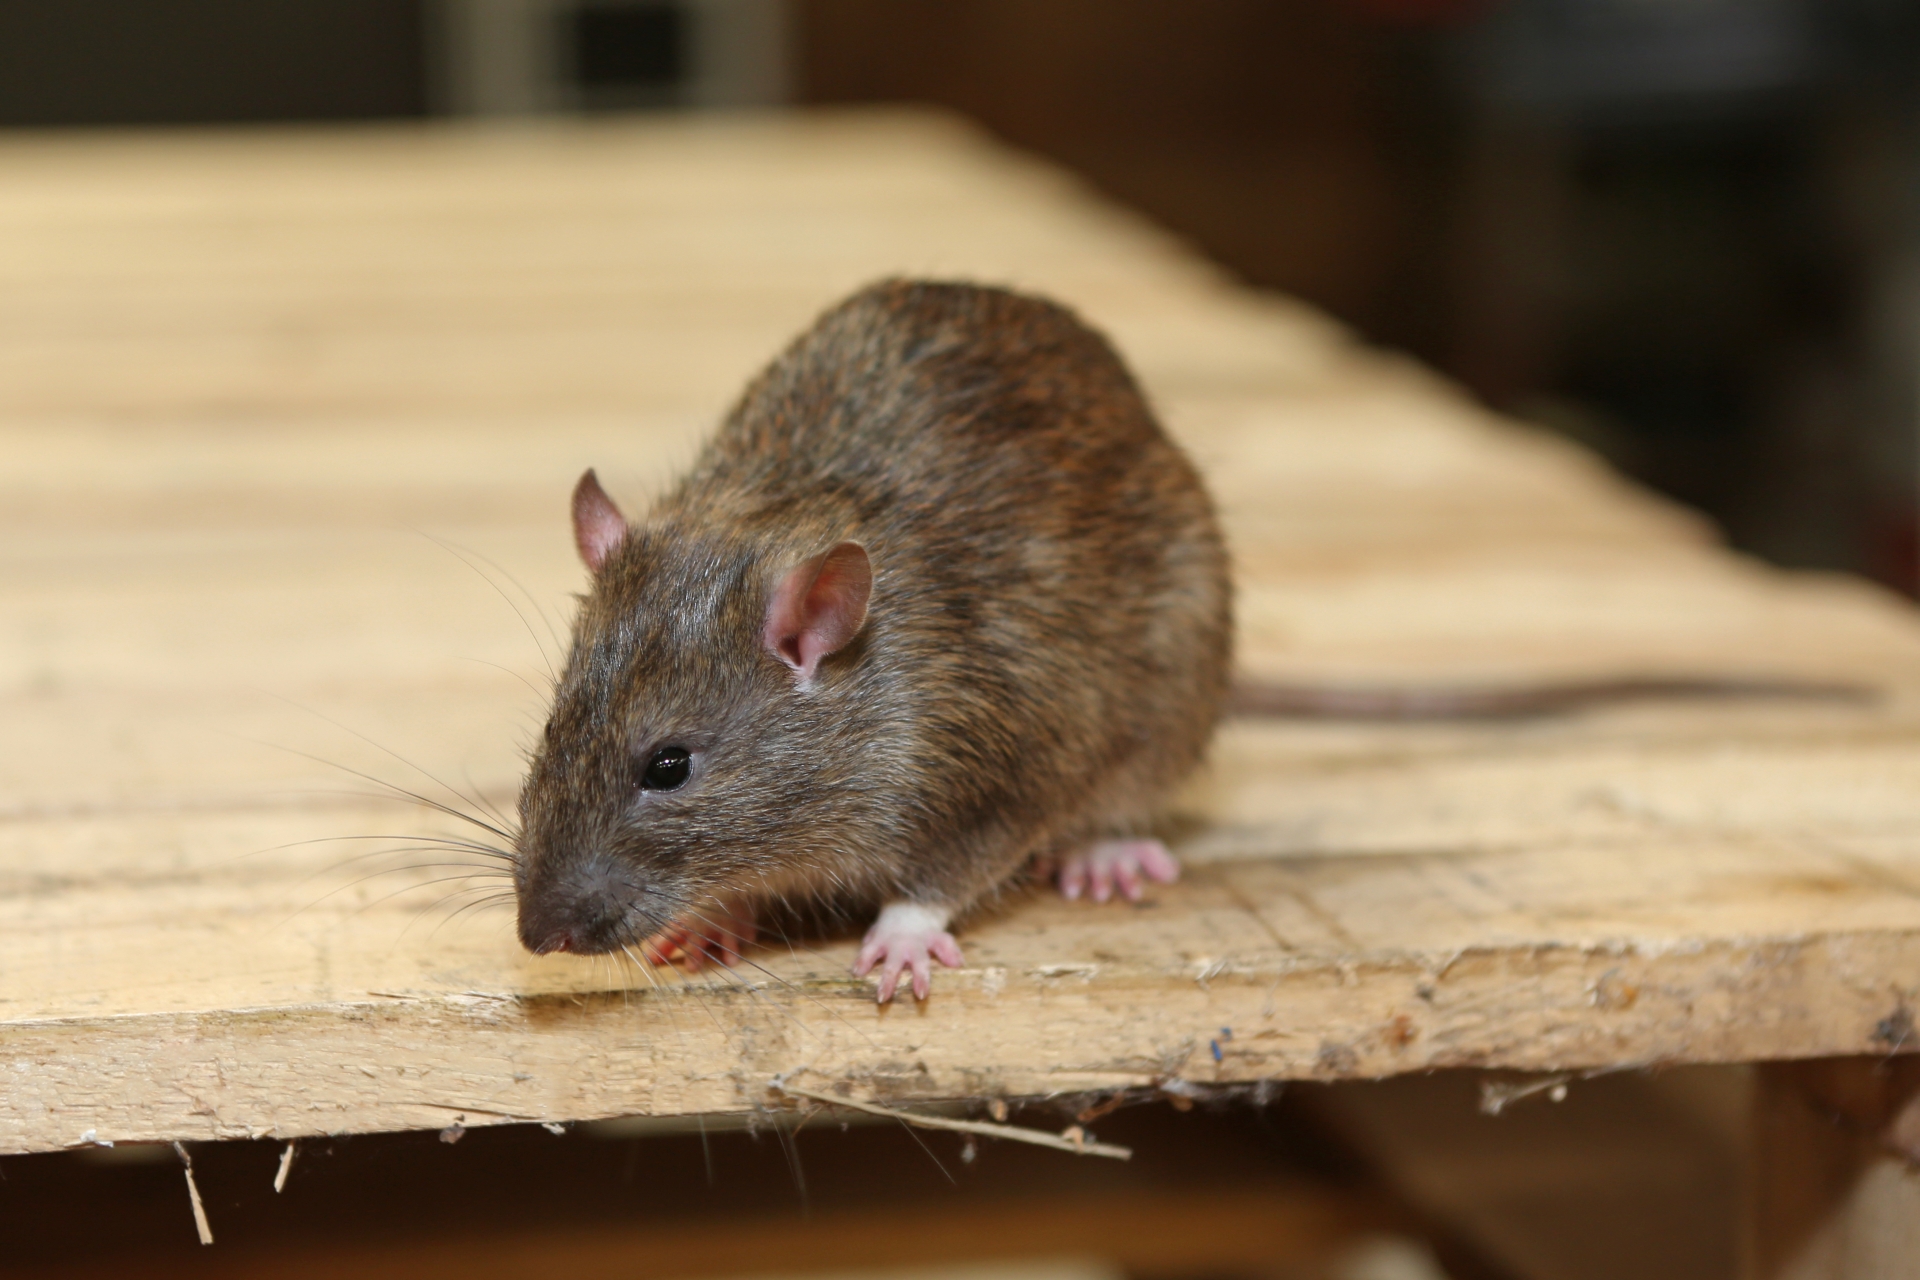 Rat Infestation, Pest Control in Canning Town, North Woolwich, E16. Call Now 020 8166 9746